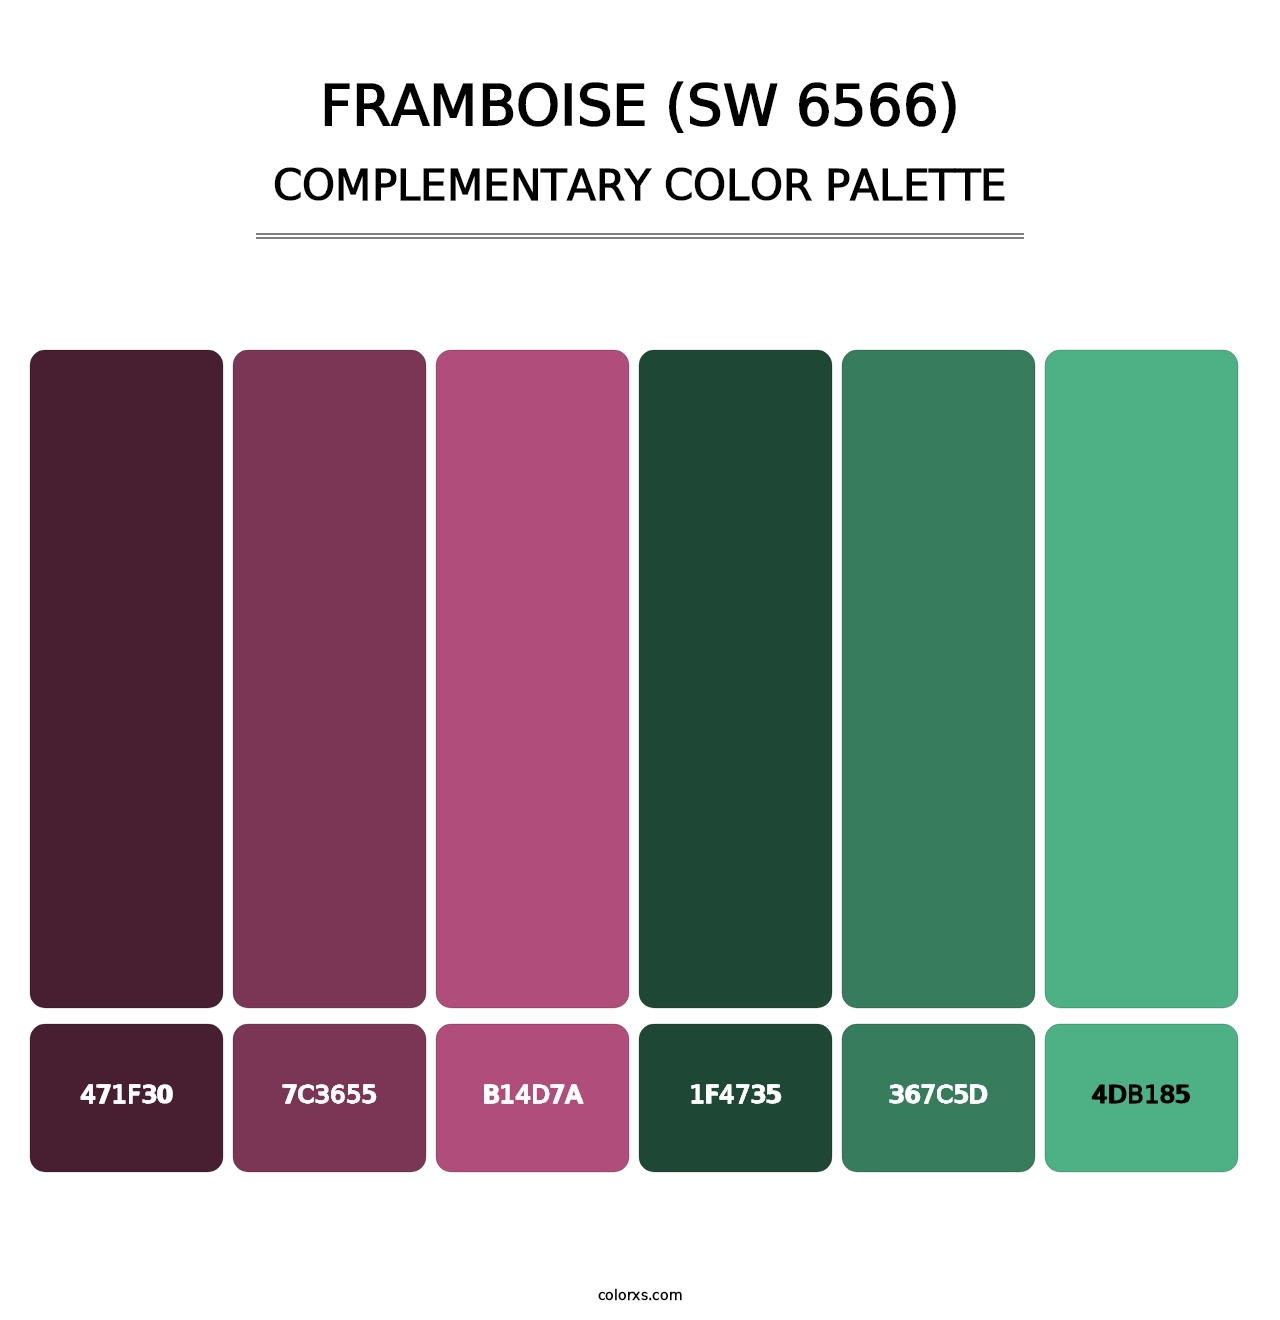 Framboise (SW 6566) - Complementary Color Palette